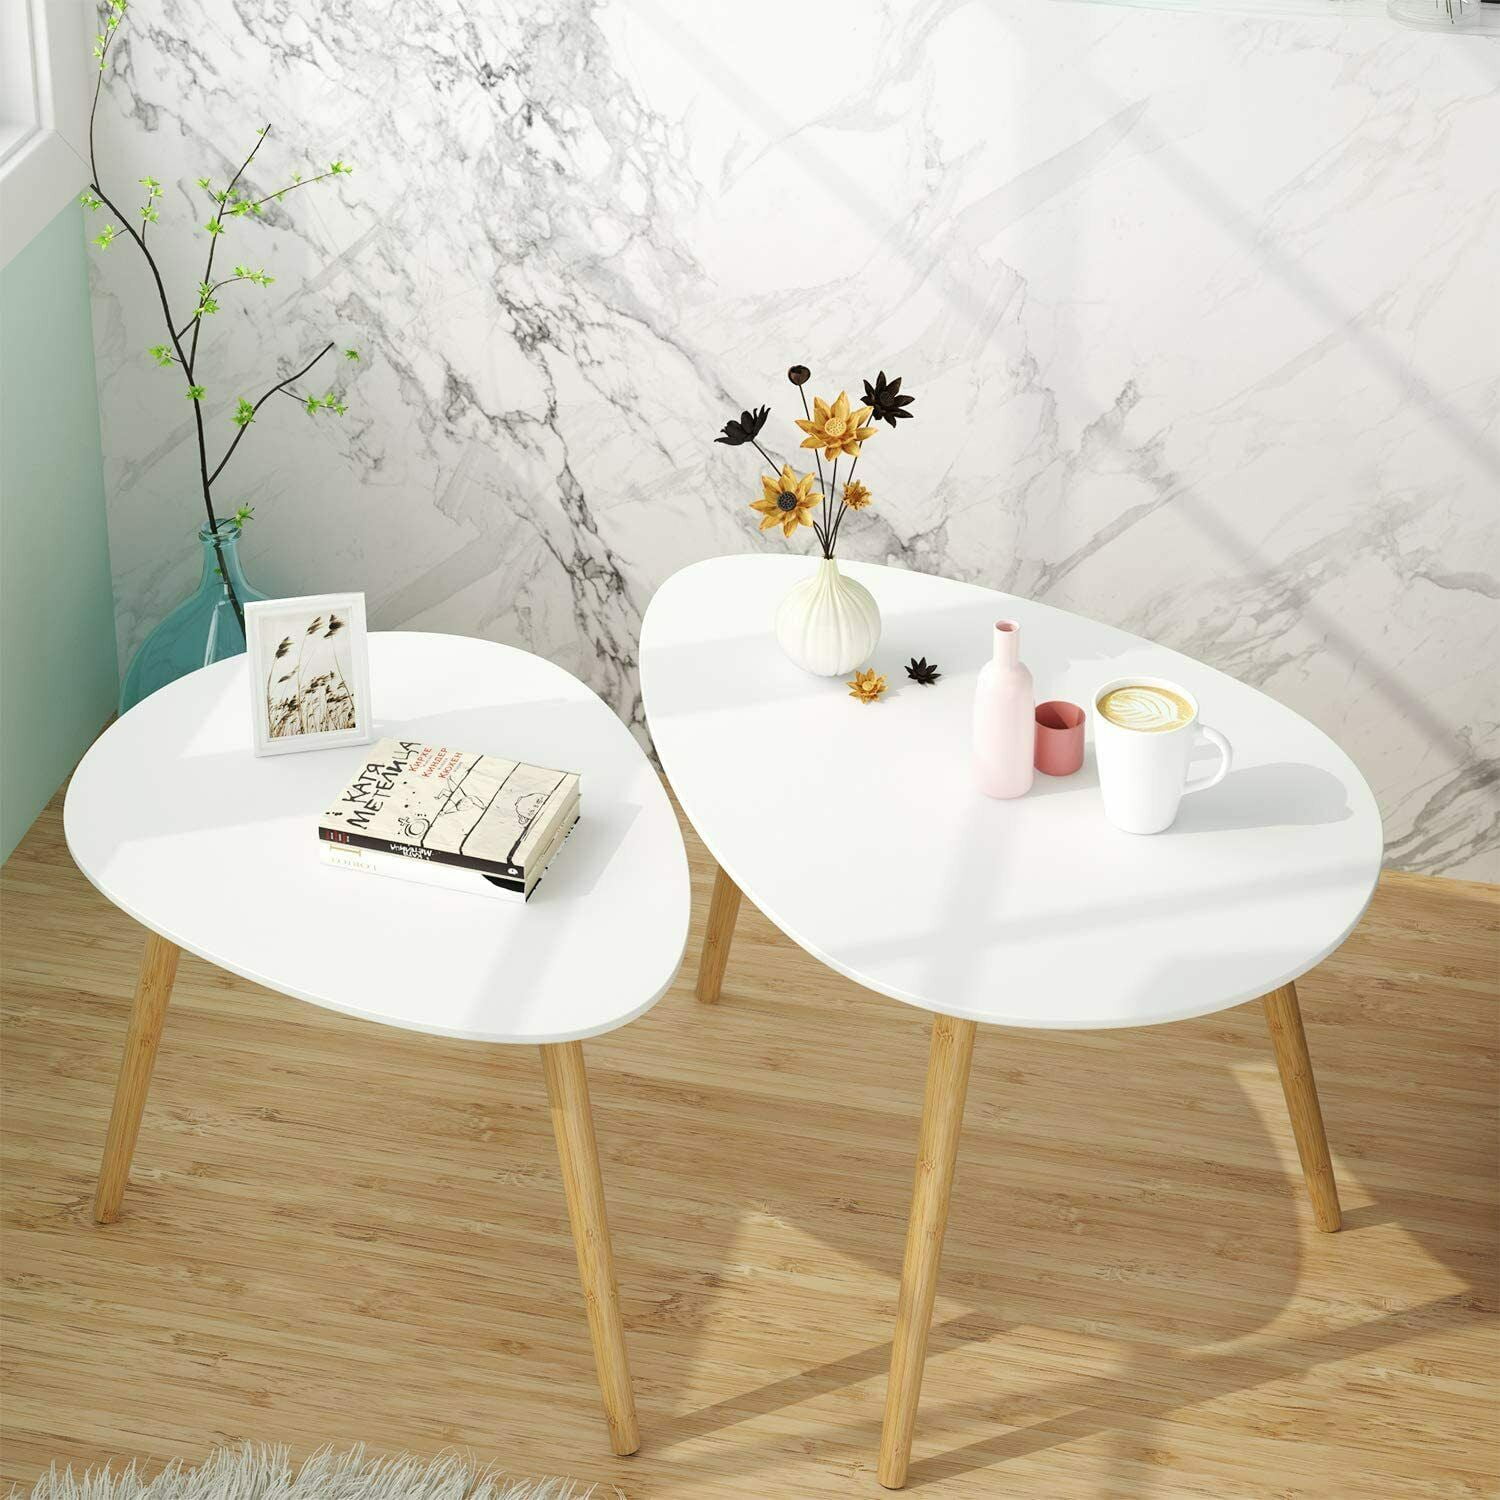 Homfa Coffee Table Nesting Table End Table Side Table Water droplet shape Home and Office White Set of 2